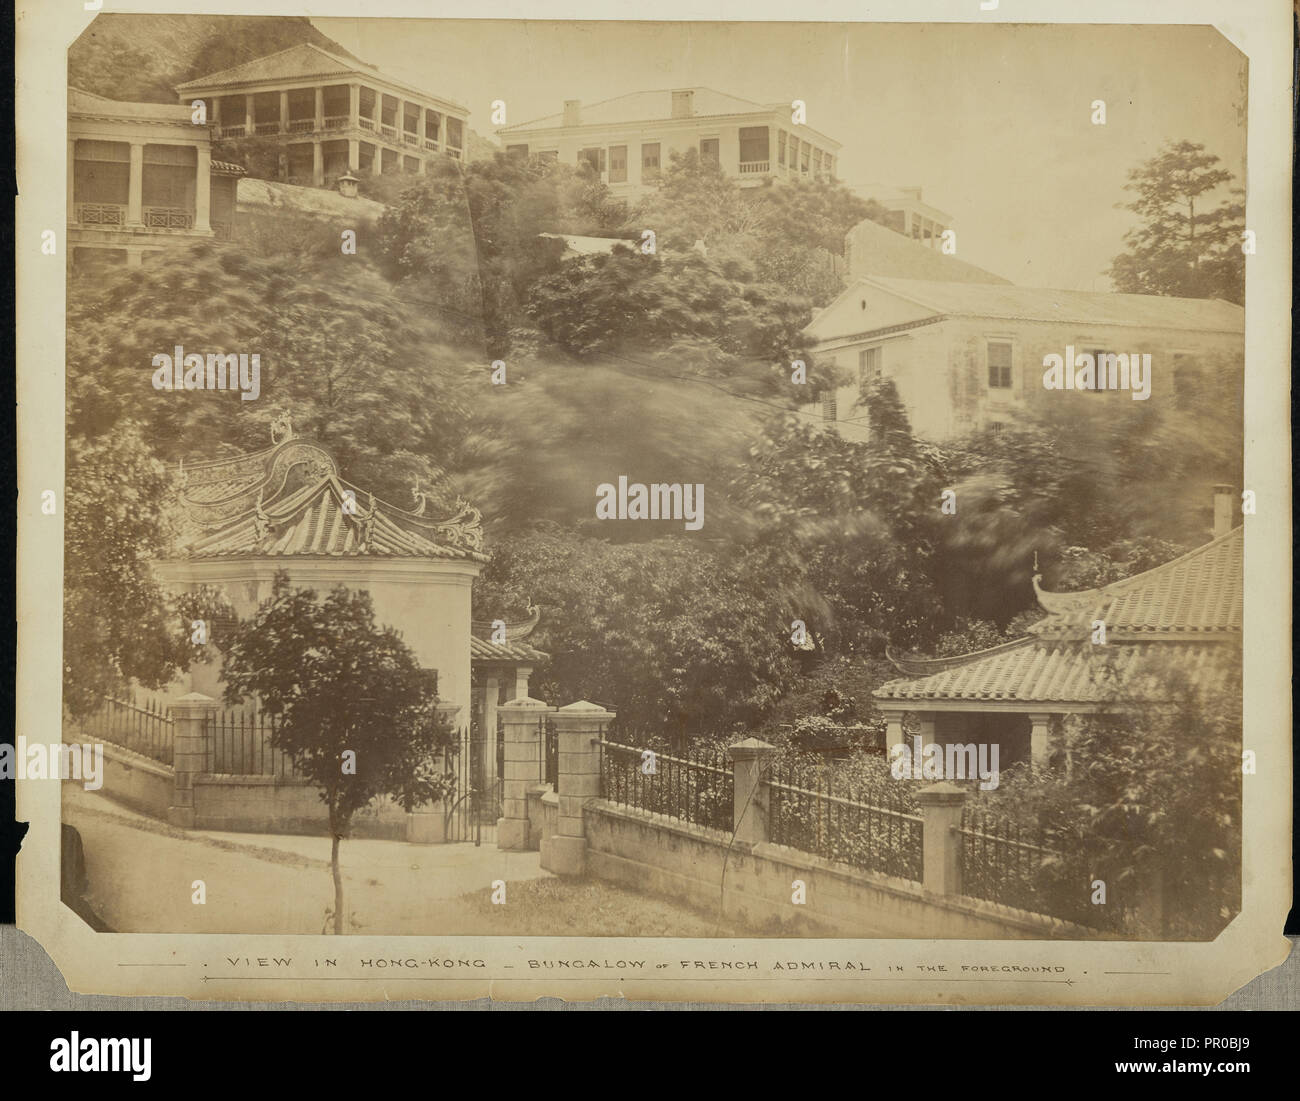 View in Hong-Kong - Bungalow of French Admiral in Foreground; Felice Beato, 1832 - 1909, Hong Kong; 1860 Stock Photo